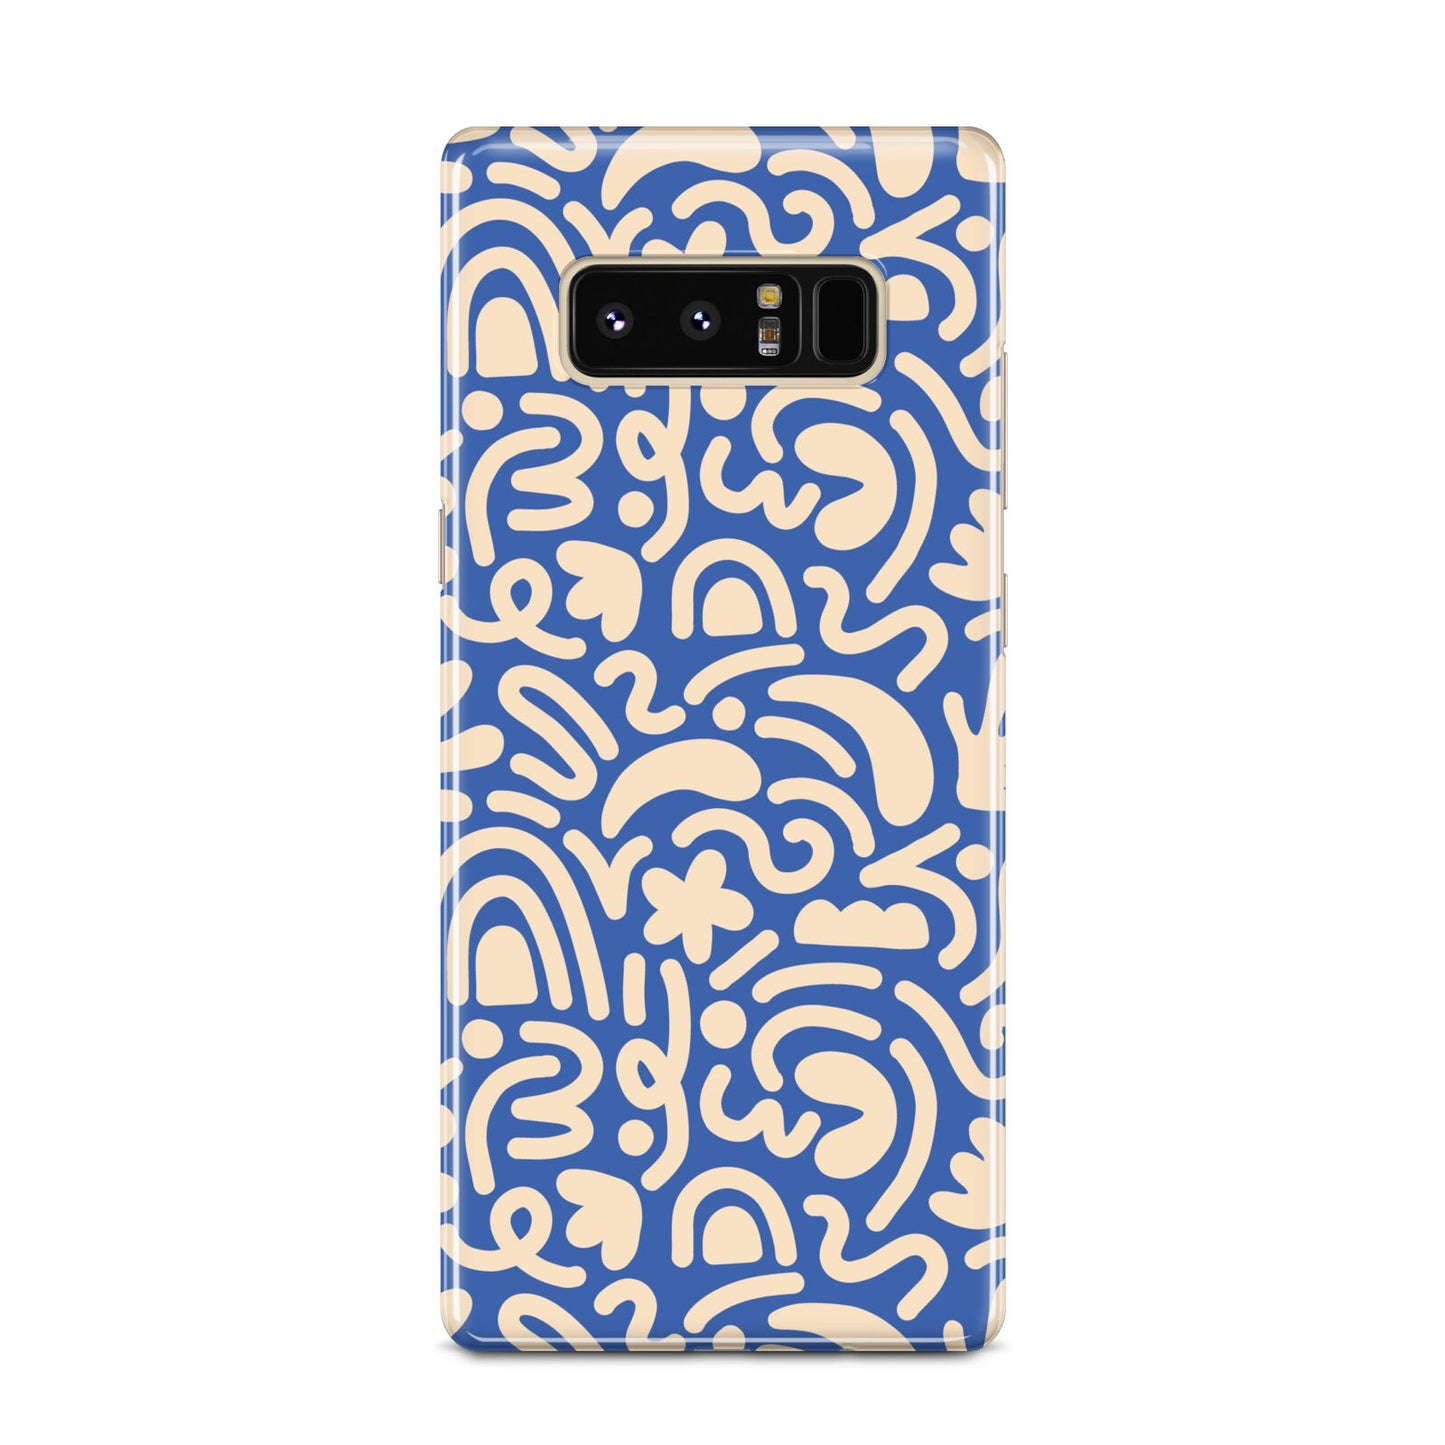 Abstract Samsung Galaxy Note 8 Case